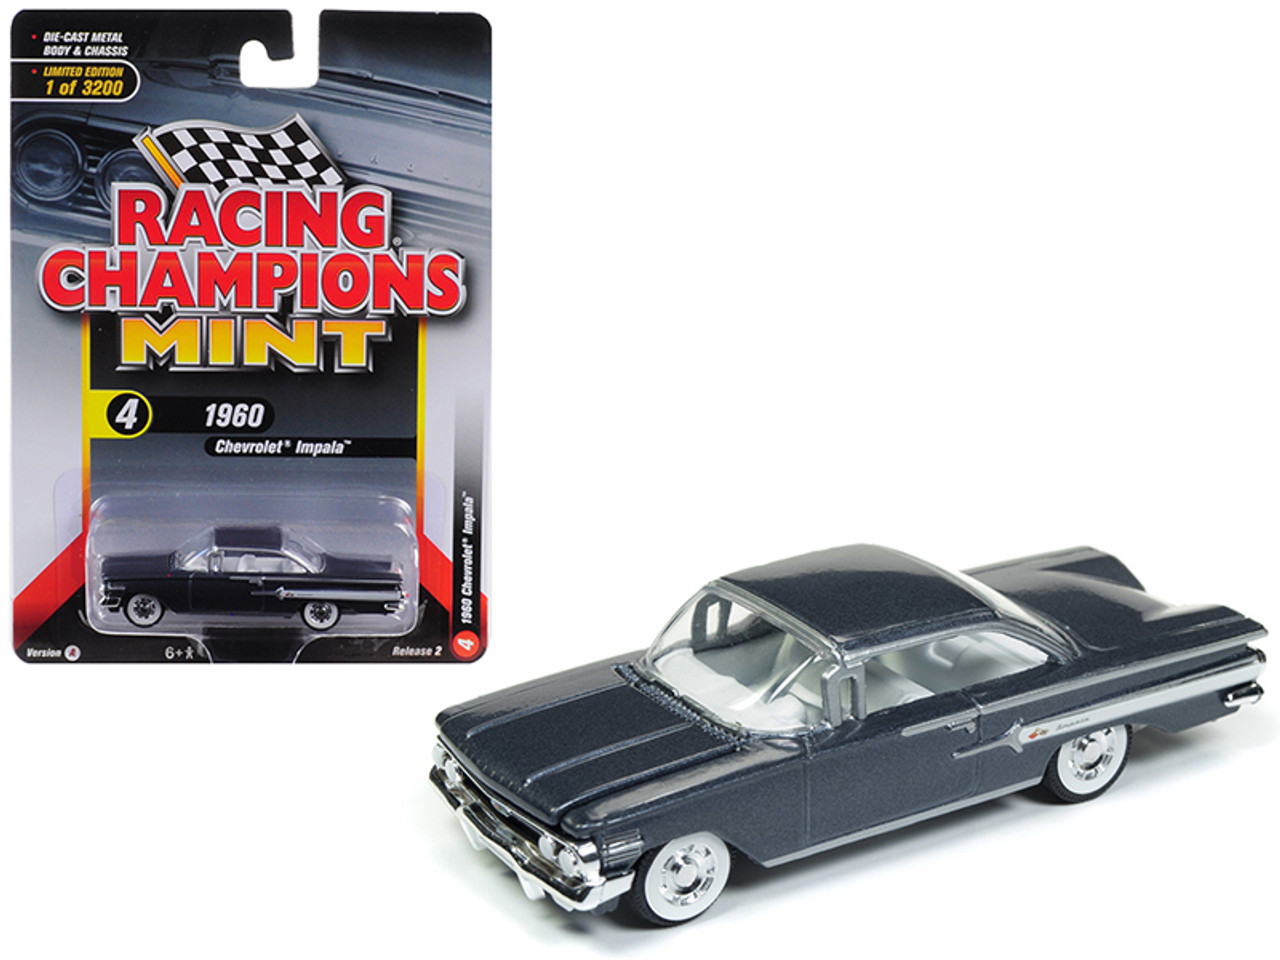 1960 Chevrolet Impala Shadow Gray Metallic Limited Edition to 3,200 pieces Worldwide 1/64 Diecast Model Car by Racing Champions